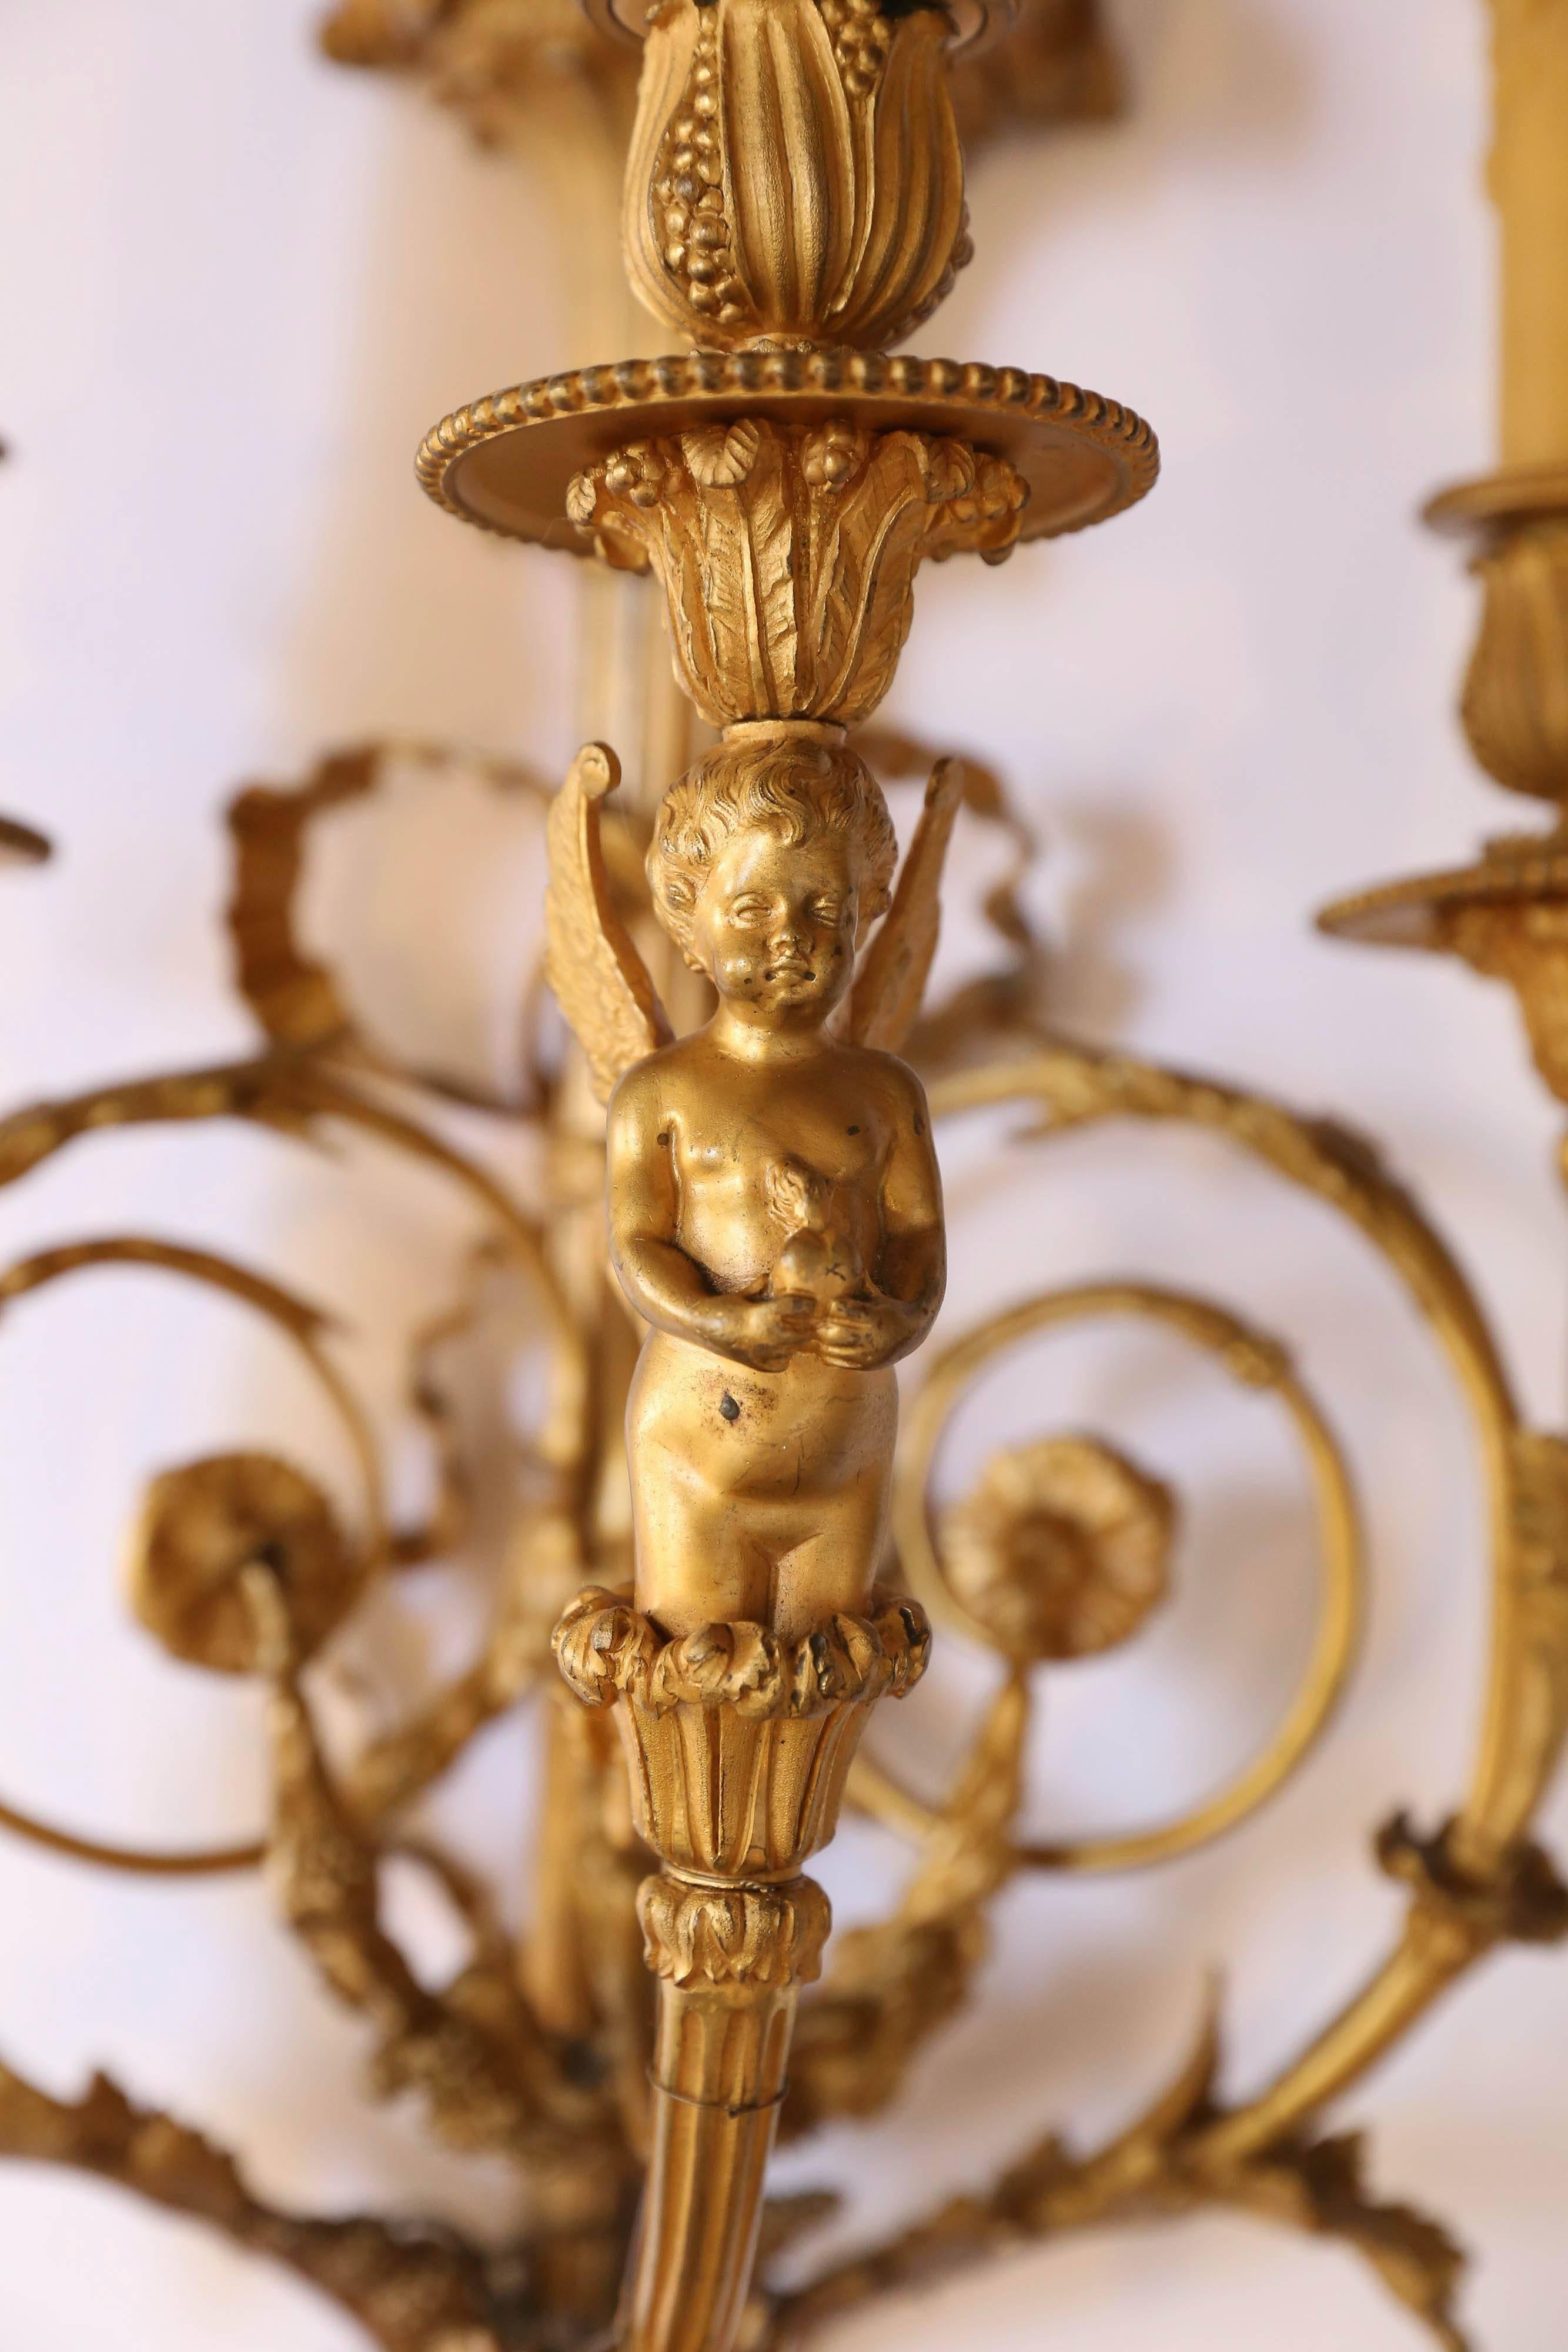 Beautiful pair of gilt bronze sconces with scrolling arms that support
The candleholders that have been wired. Lovely floral and foliate
Design supporting a winged angel at the central post. A bird is sitting at the
Top pediment.